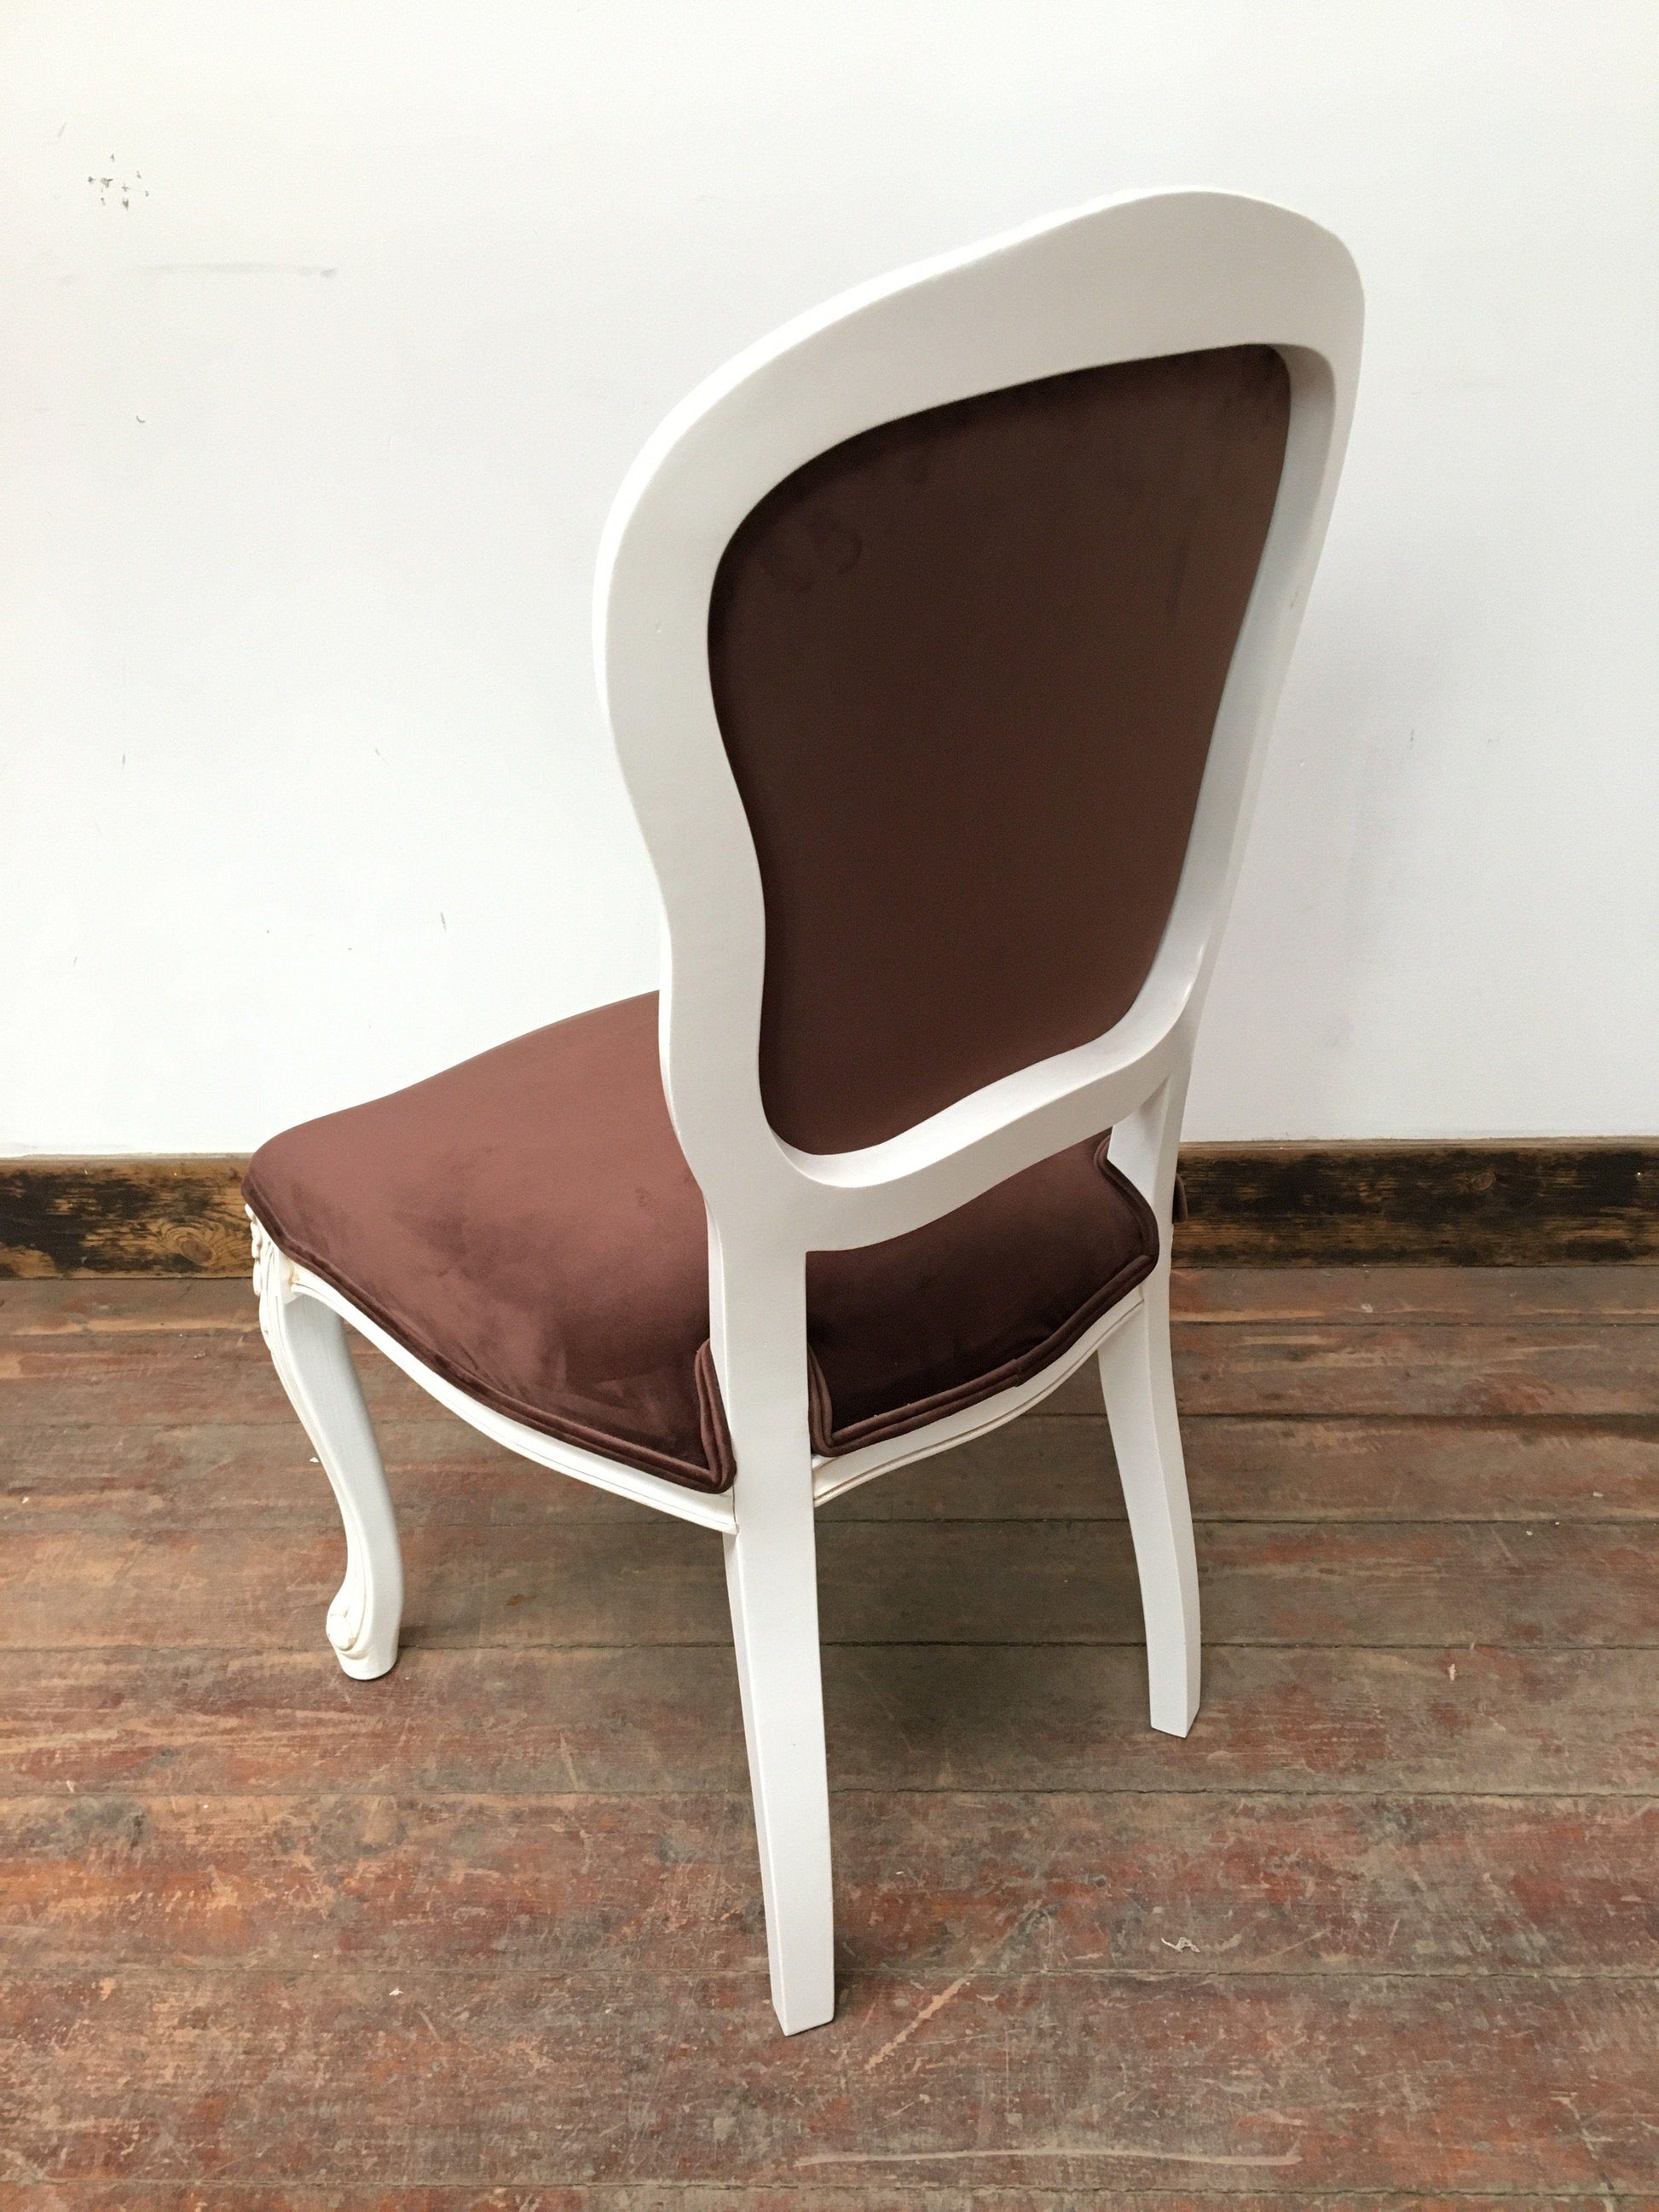 BROWN SPOONBACK ORNATE CHAIR (NEW) - Browsers Emporium